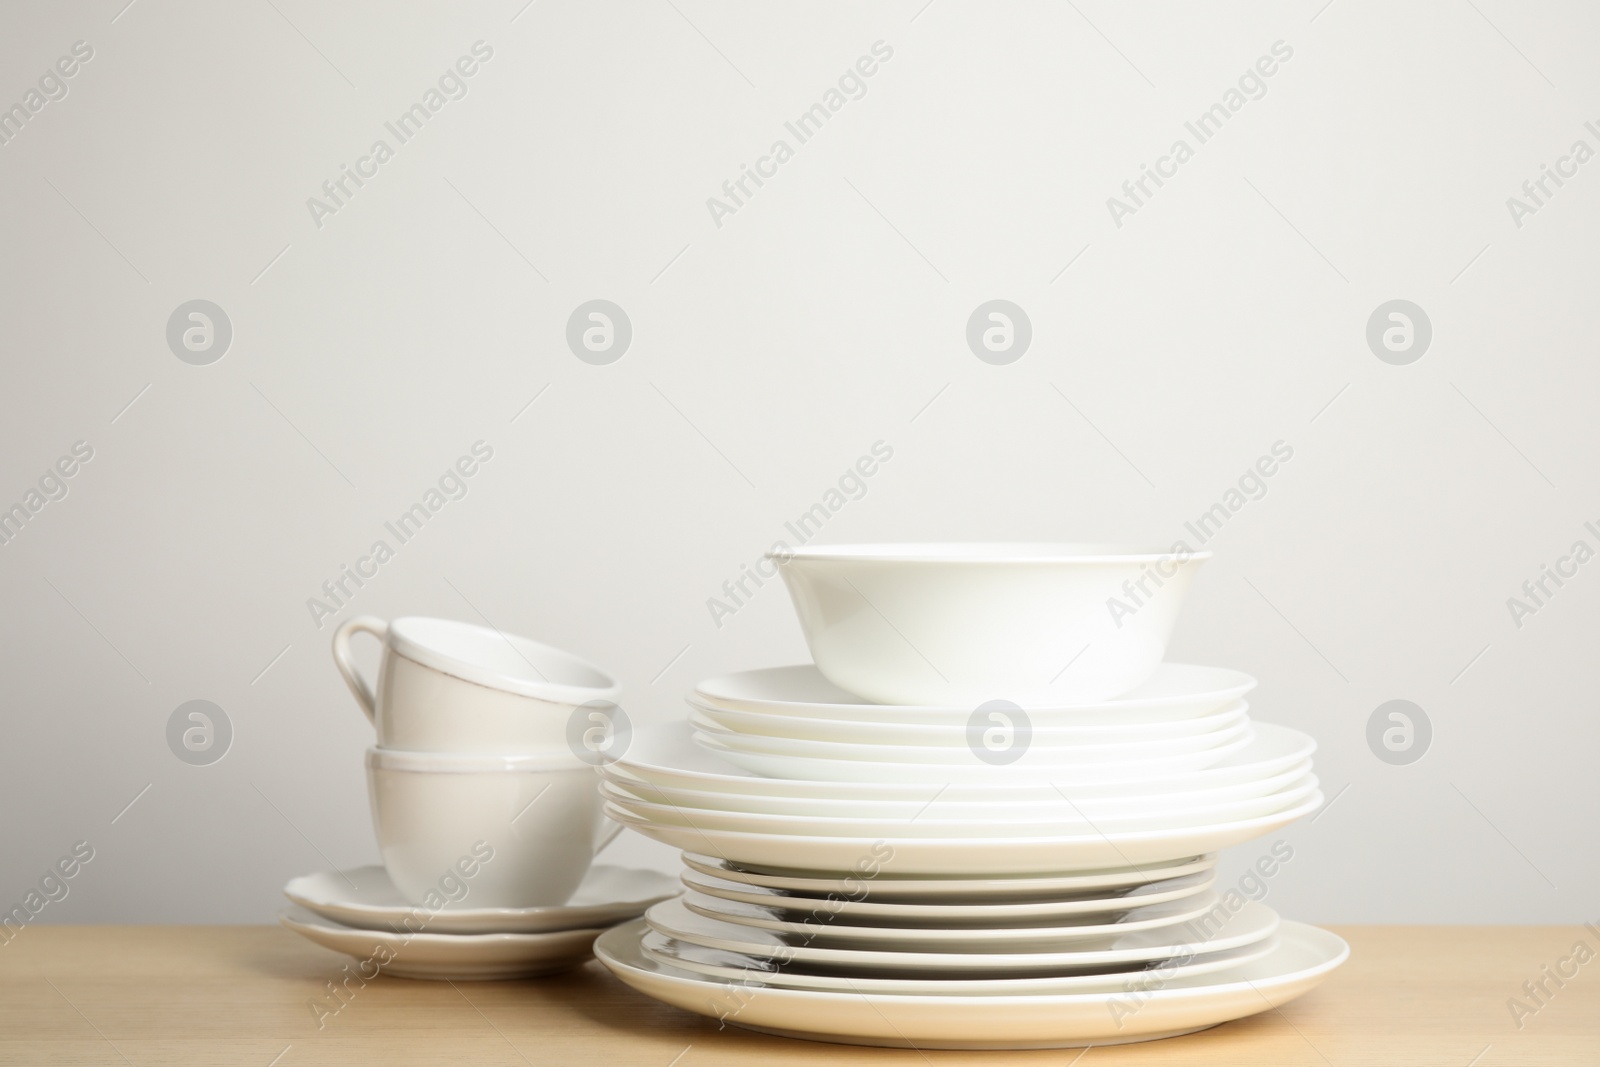 Photo of Clean plates, bowl and cups on wooden table against white background. Space for text